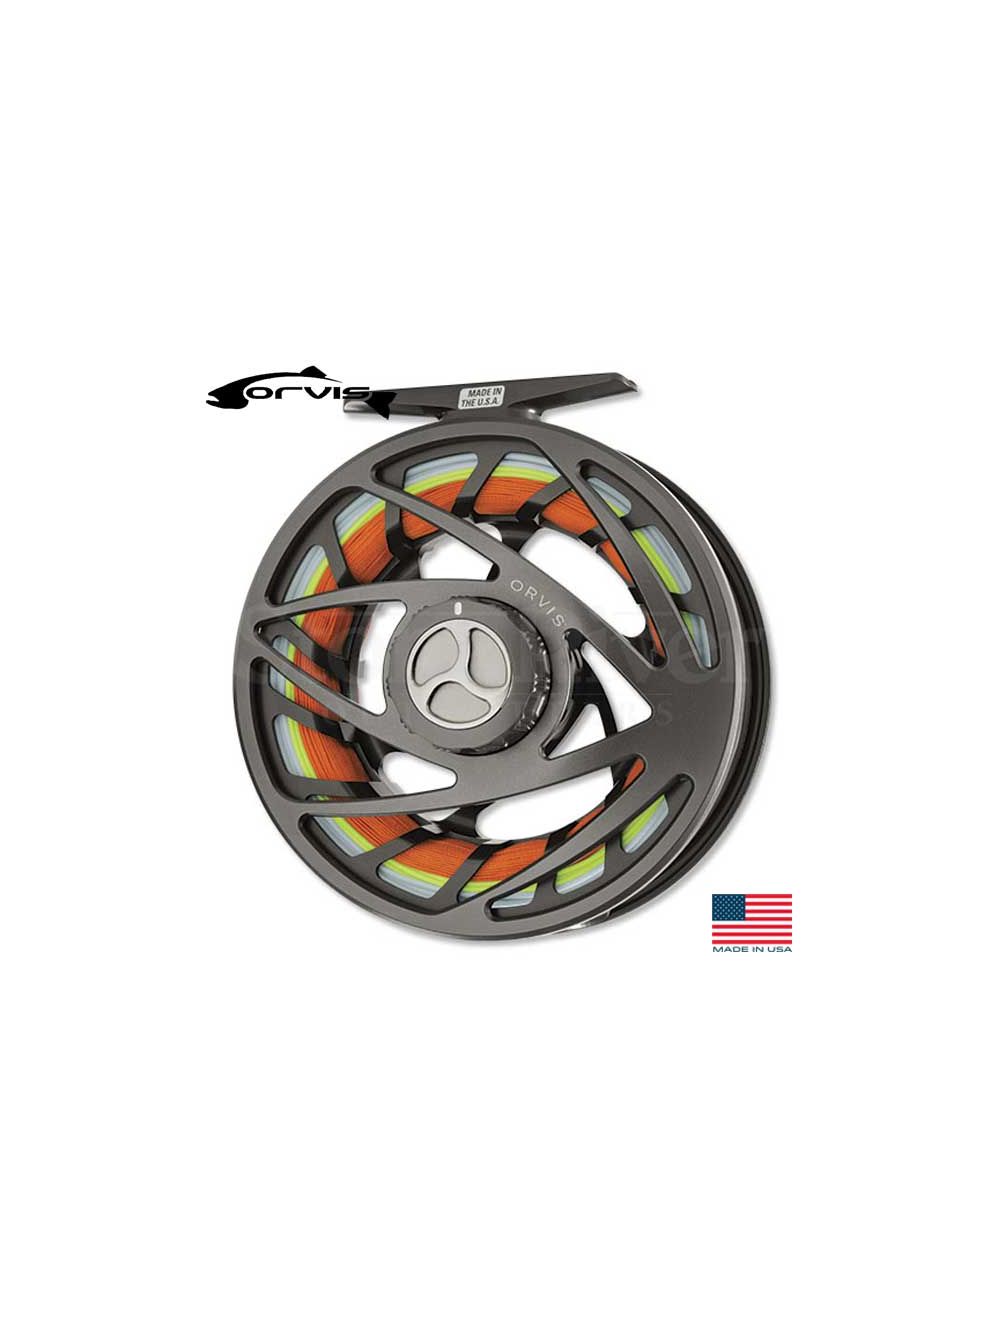 Orvis Mirage Fly Reel - Made in USA